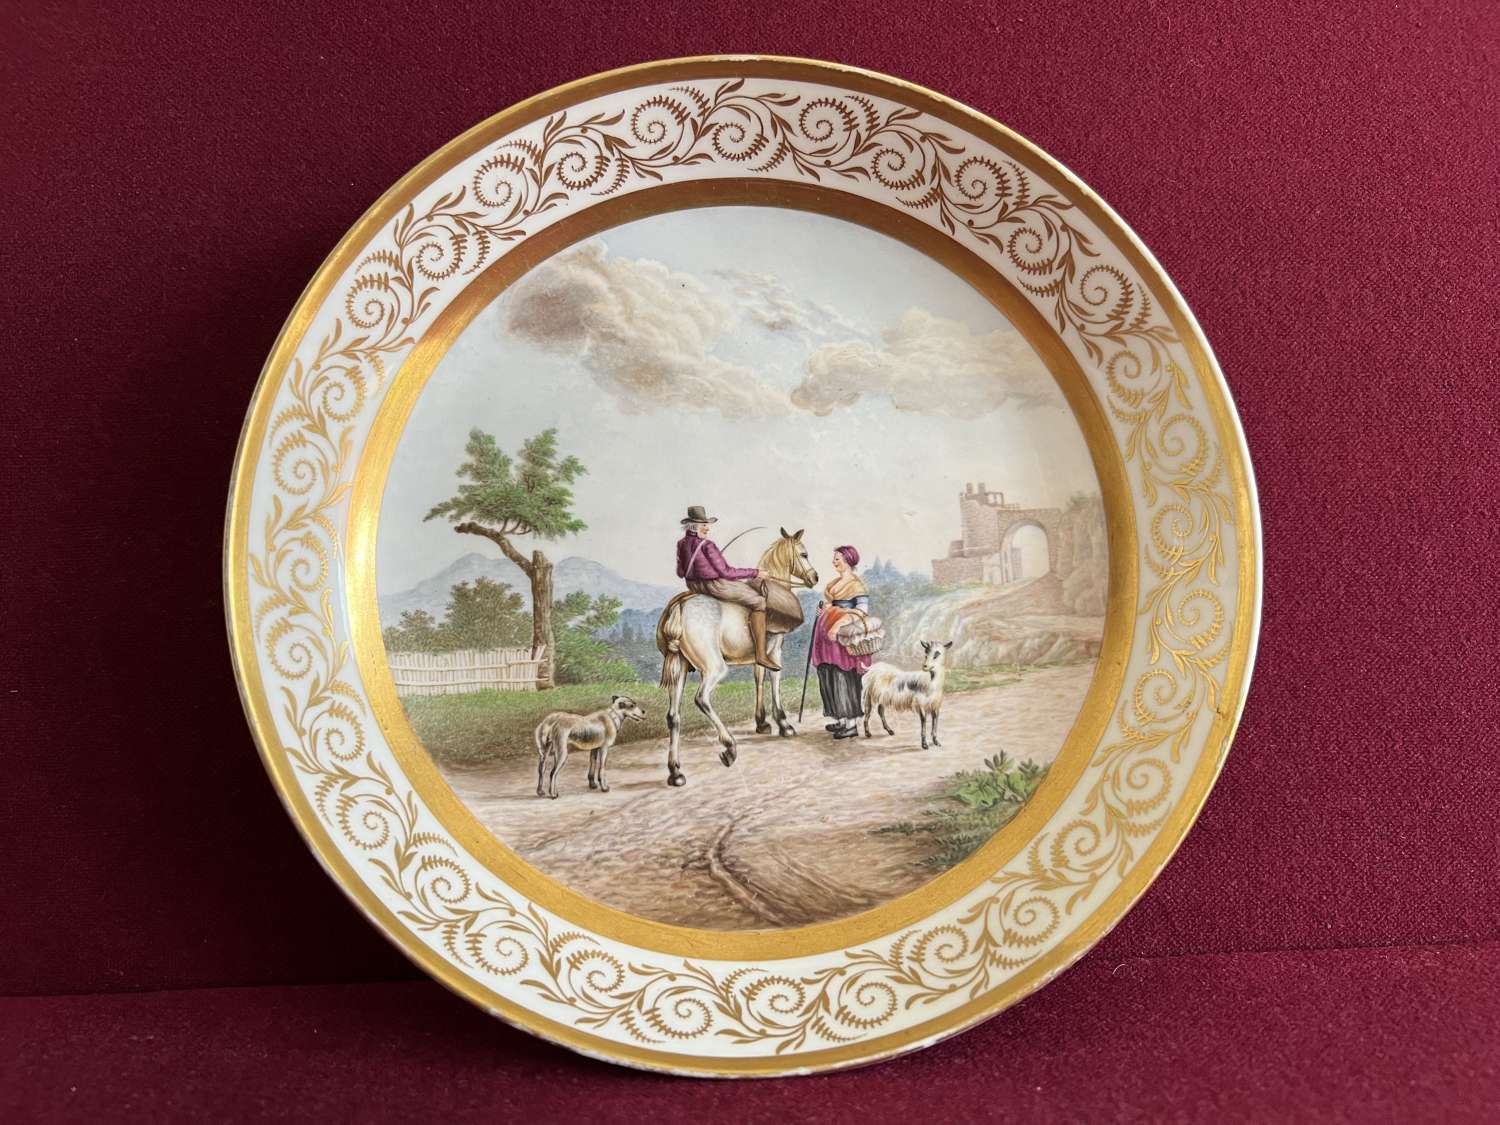 An English Porcelain Saucer Dish decorated with a rural scene c.1810